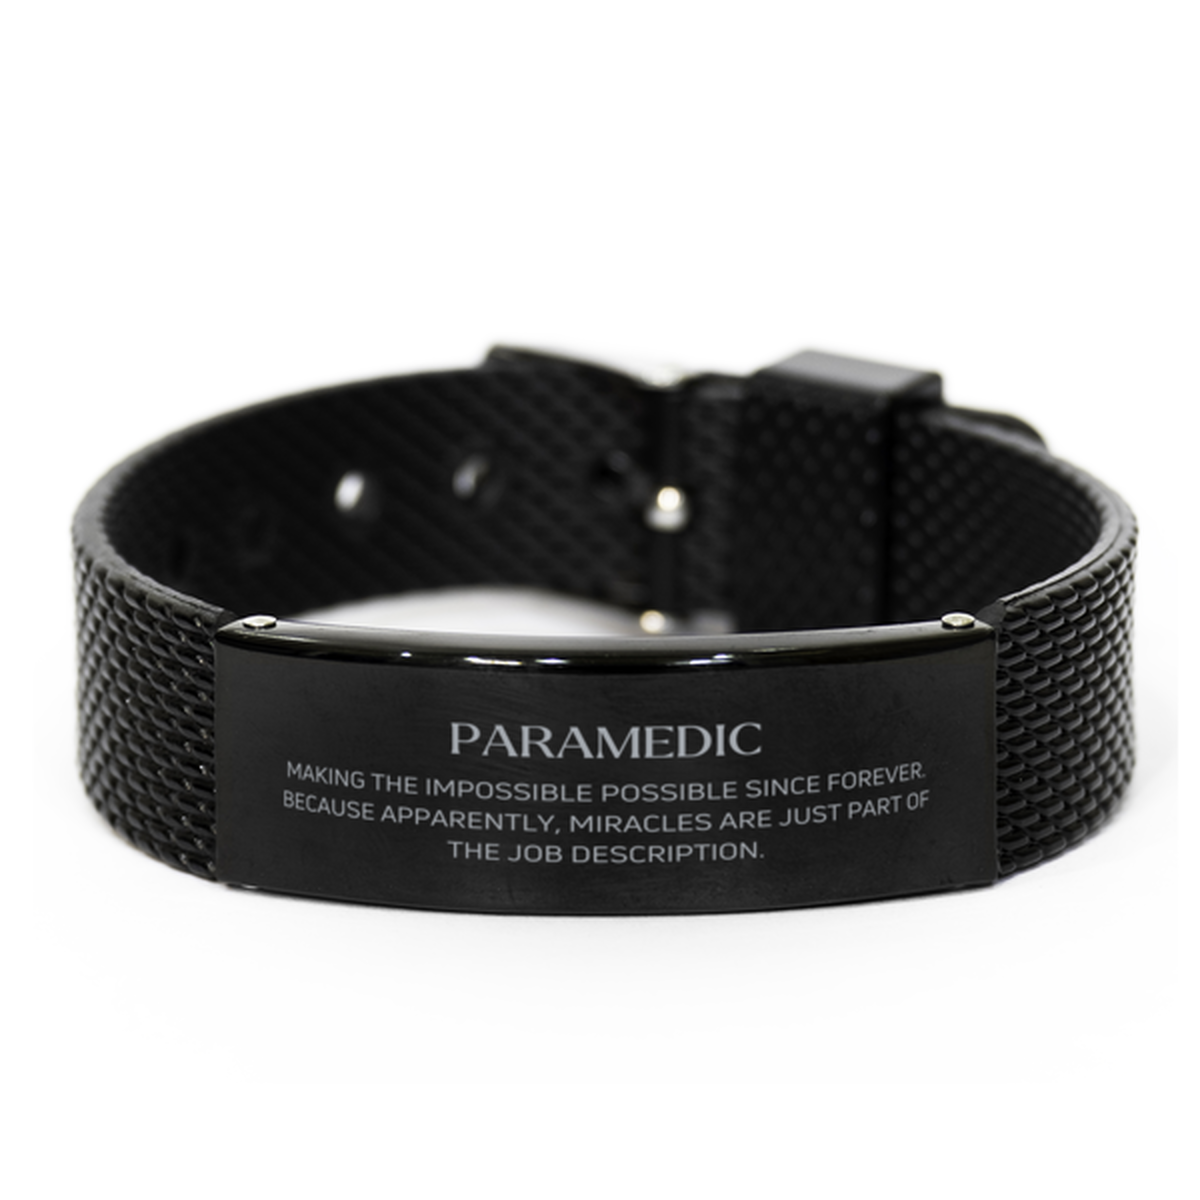 Funny Paramedic Gifts, Miracles are just part of the job description, Inspirational Birthday Black Shark Mesh Bracelet For Paramedic, Men, Women, Coworkers, Friends, Boss